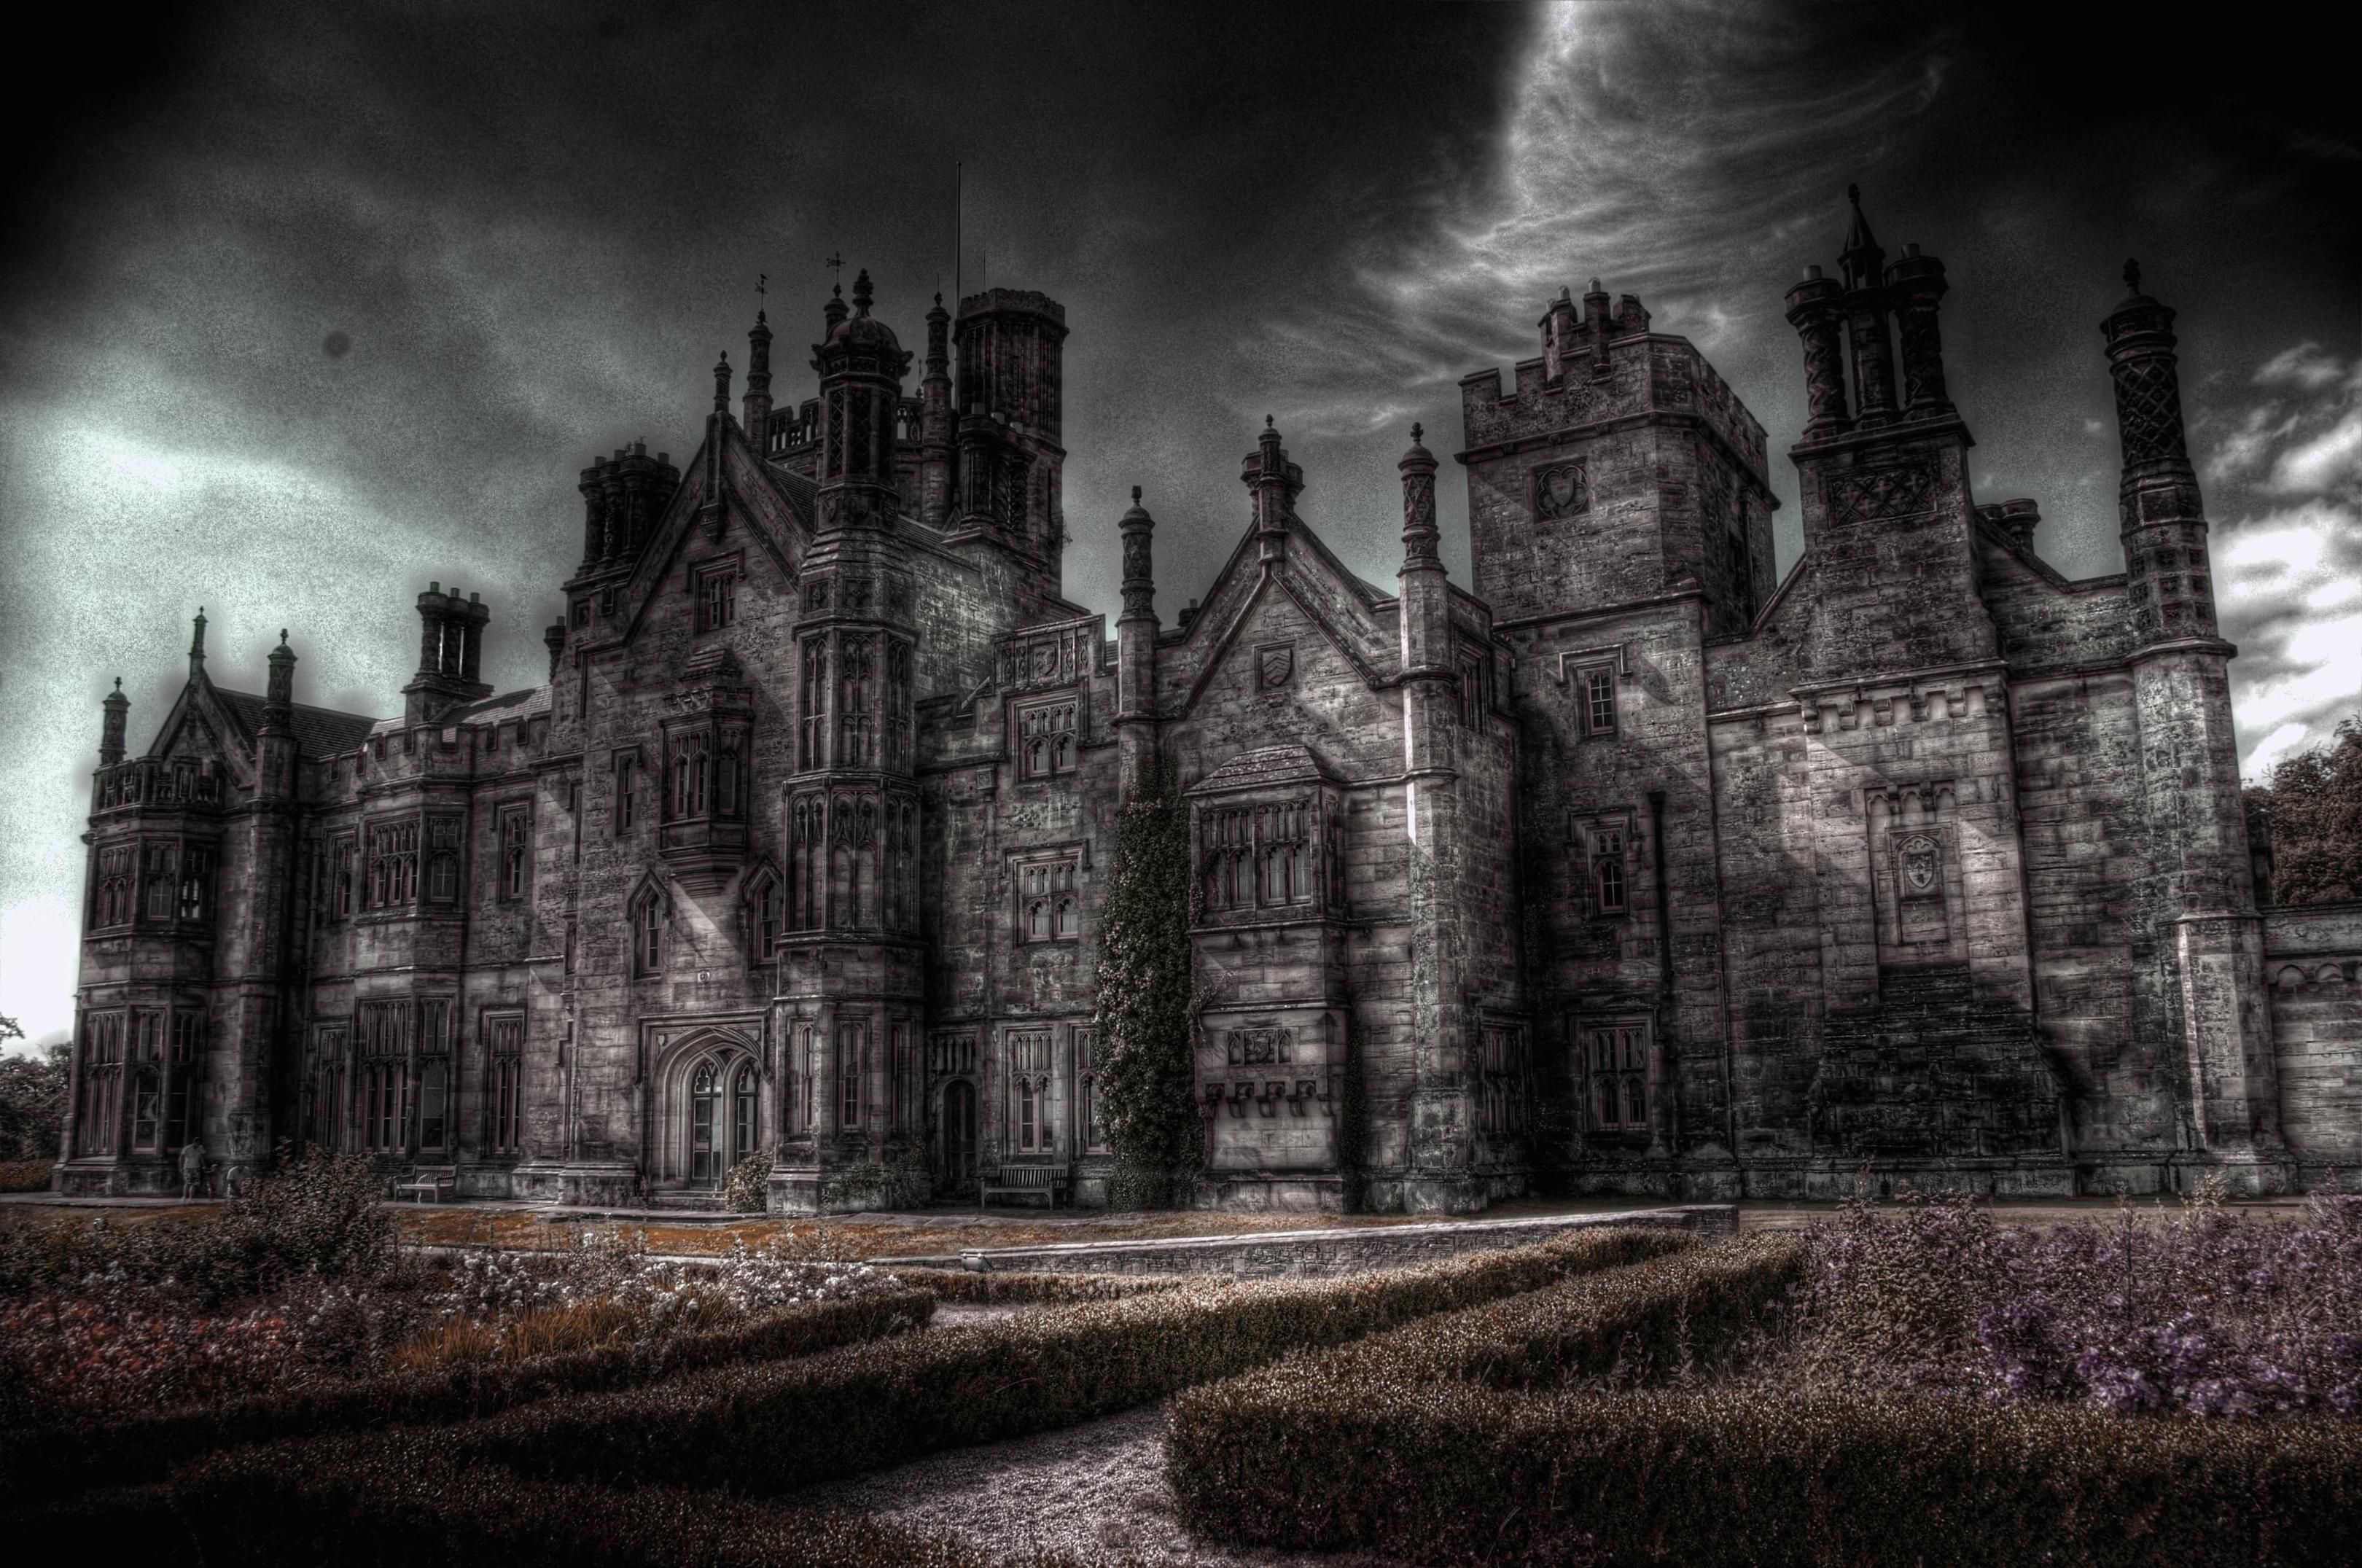 Gothic Art Galleries HD Wallpaper Res 3600x2390PX Wallpaper. Gothic castle, Gothic architecture, Creepy houses